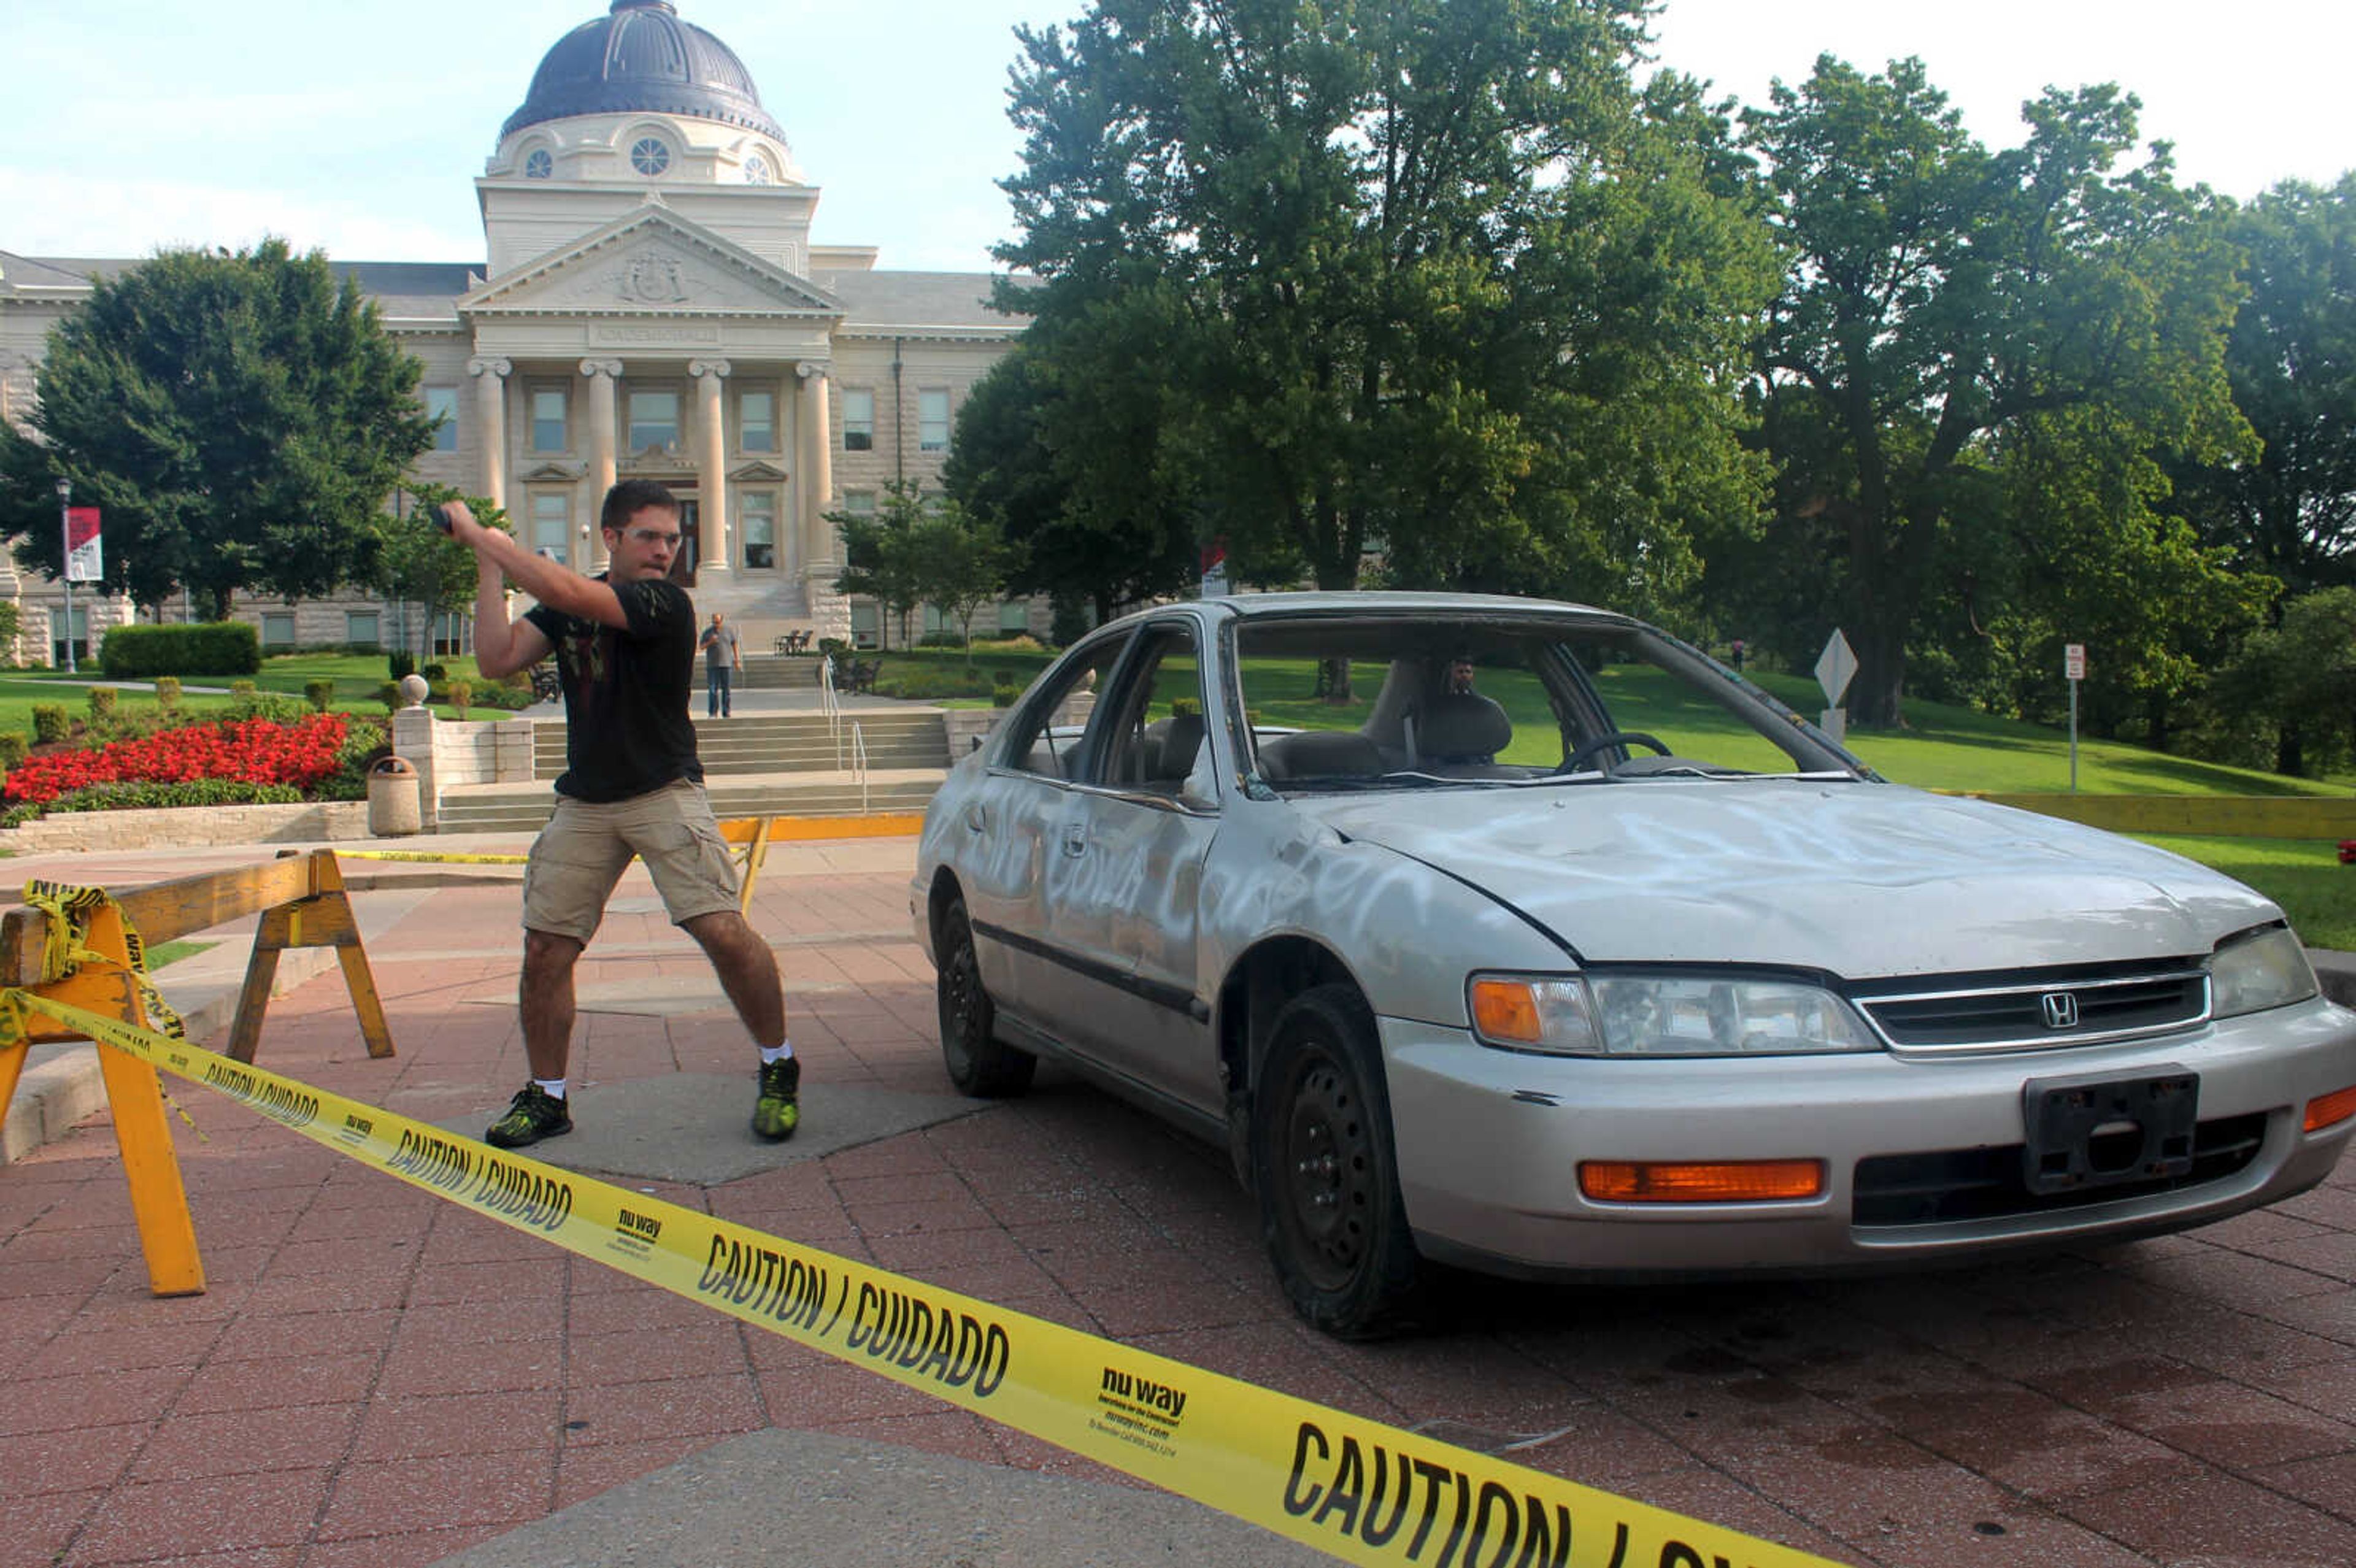 Xavier Bertmann takes a swing at the car used in the "TKE Out Cancer" event hosted on Aug. 24.